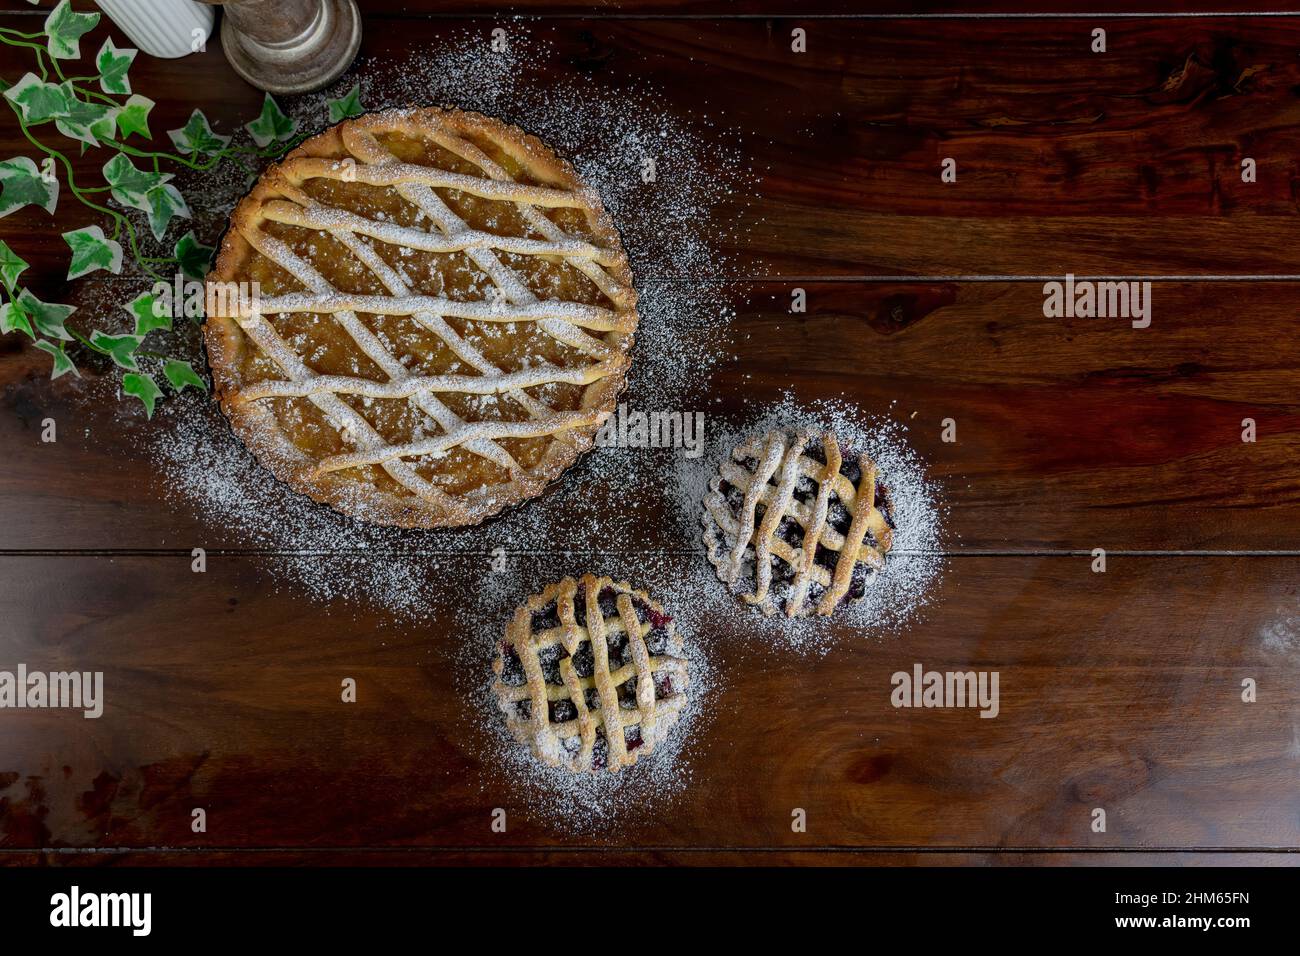 Top view Delicious apple pie large and two small blue berry tarts on wood table background. Stock Photo